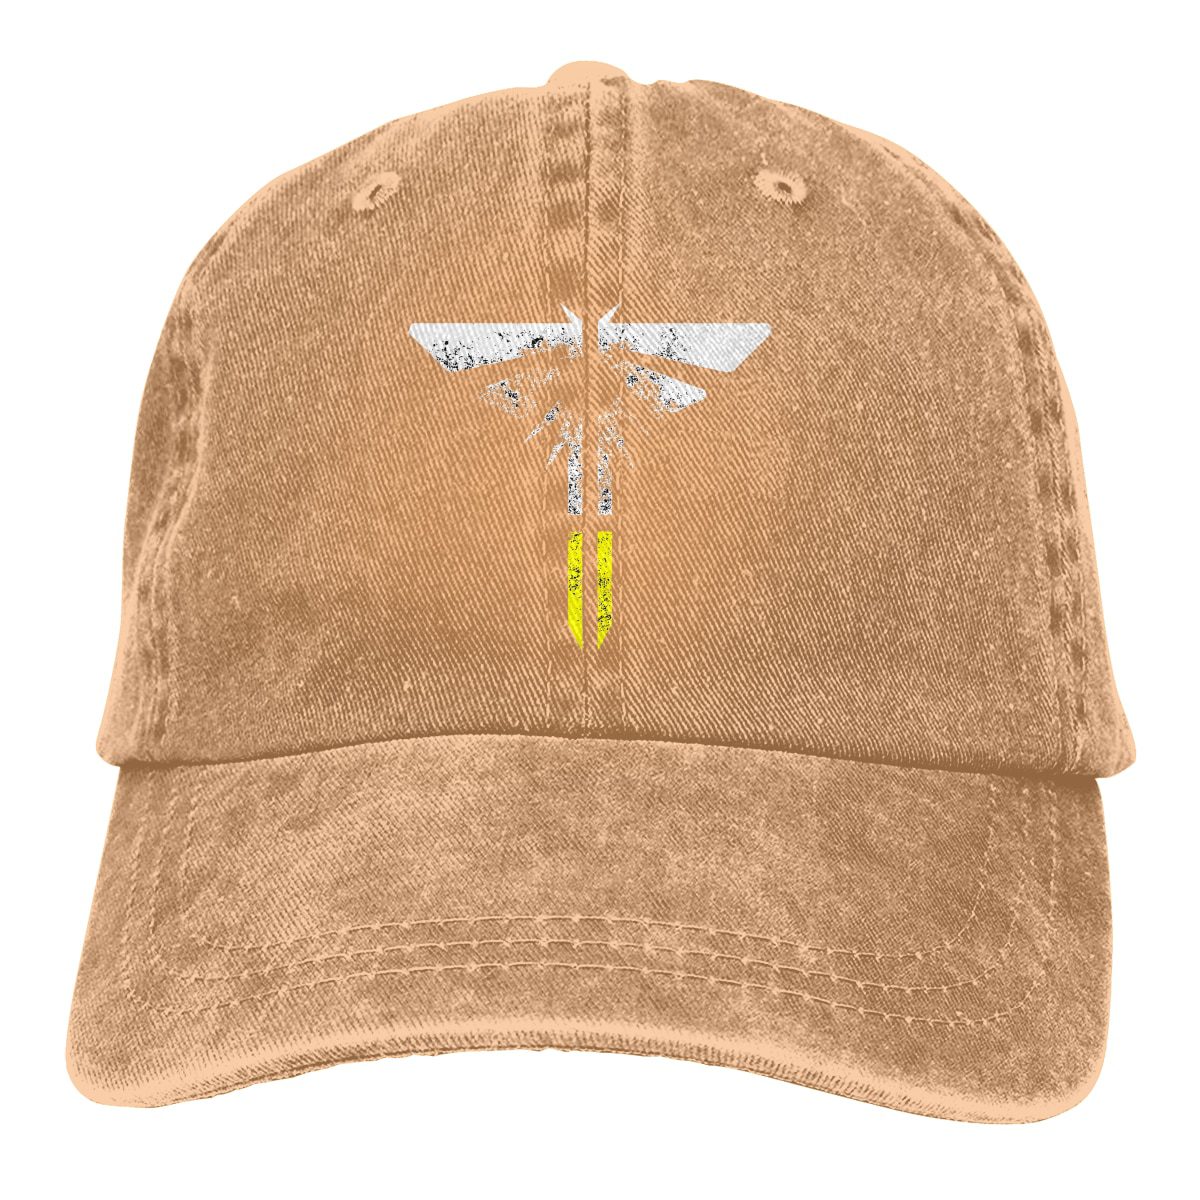 The-Last-Of-Us-Part-II-Firefly-Light-Eroded-Baseball-Cap-cowboy-hat-Peaked-cap-the.jpg